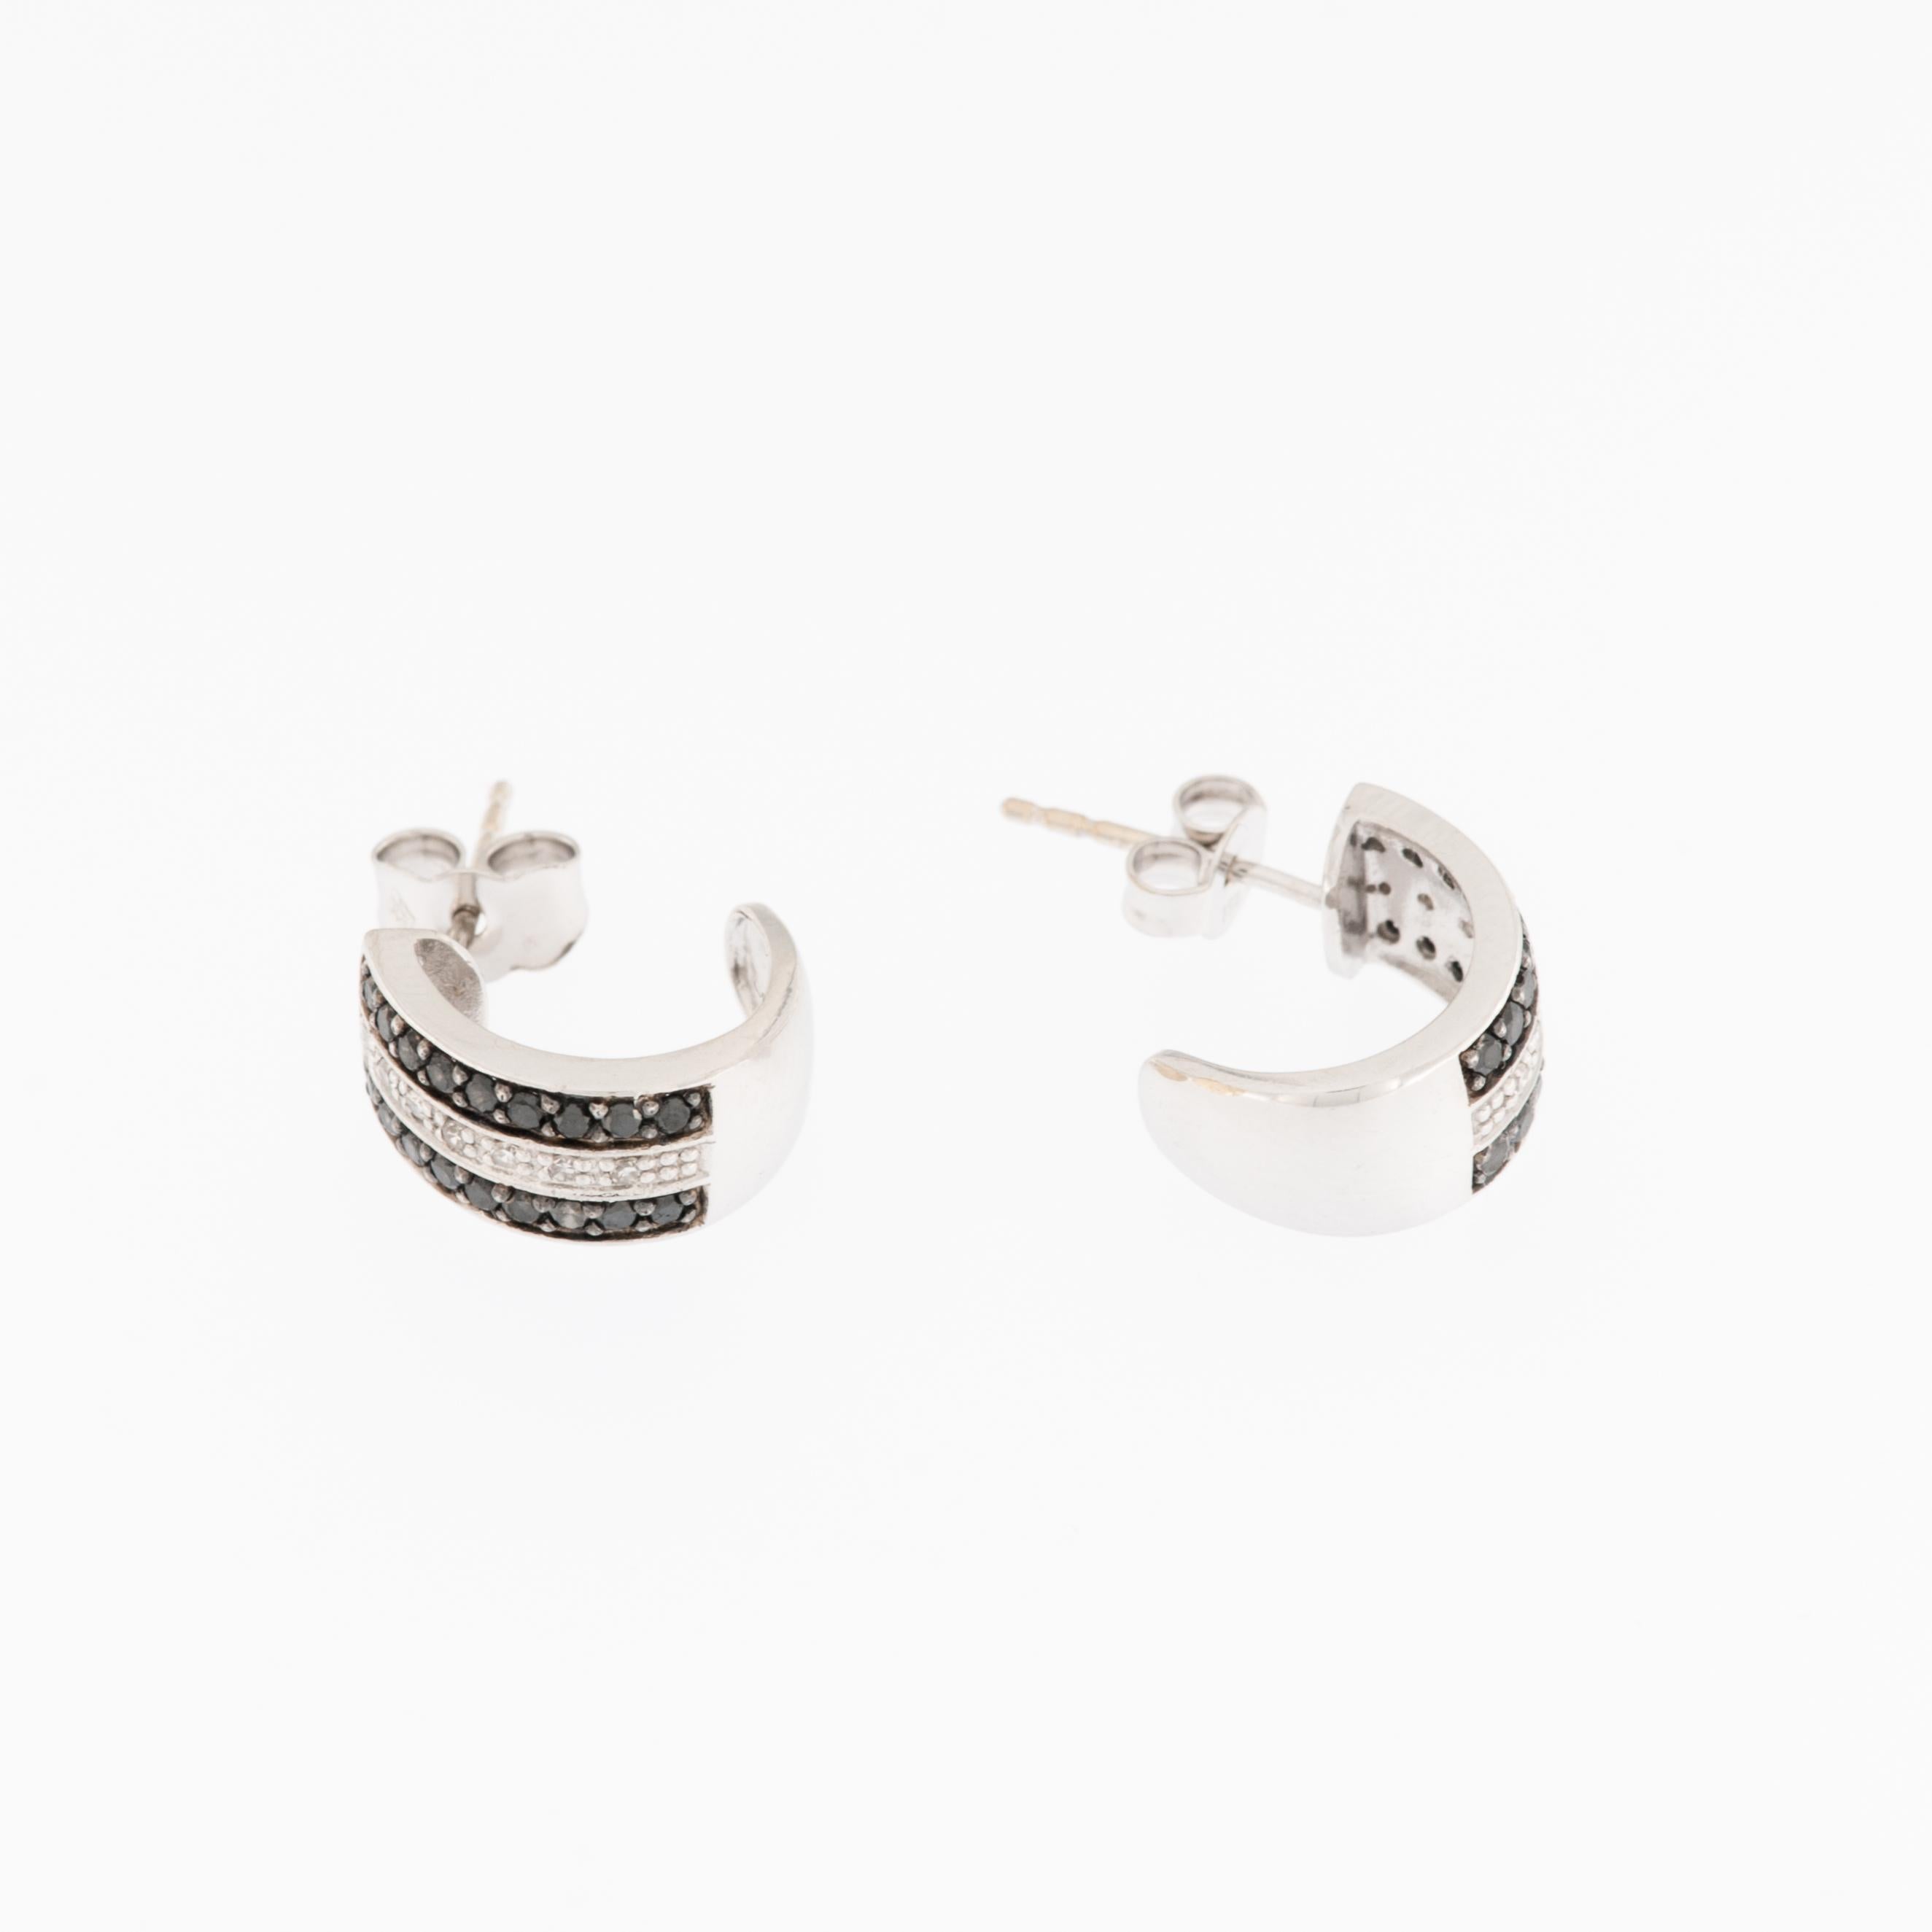 These Black and White Diamonds, 18KT White Gold Earrings are a wonderful piece of jewelry designed to capture attention and elegance. 

The earrings feature a combination of black and white diamonds, brilliant-cut for 0.40ct total. Black diamonds